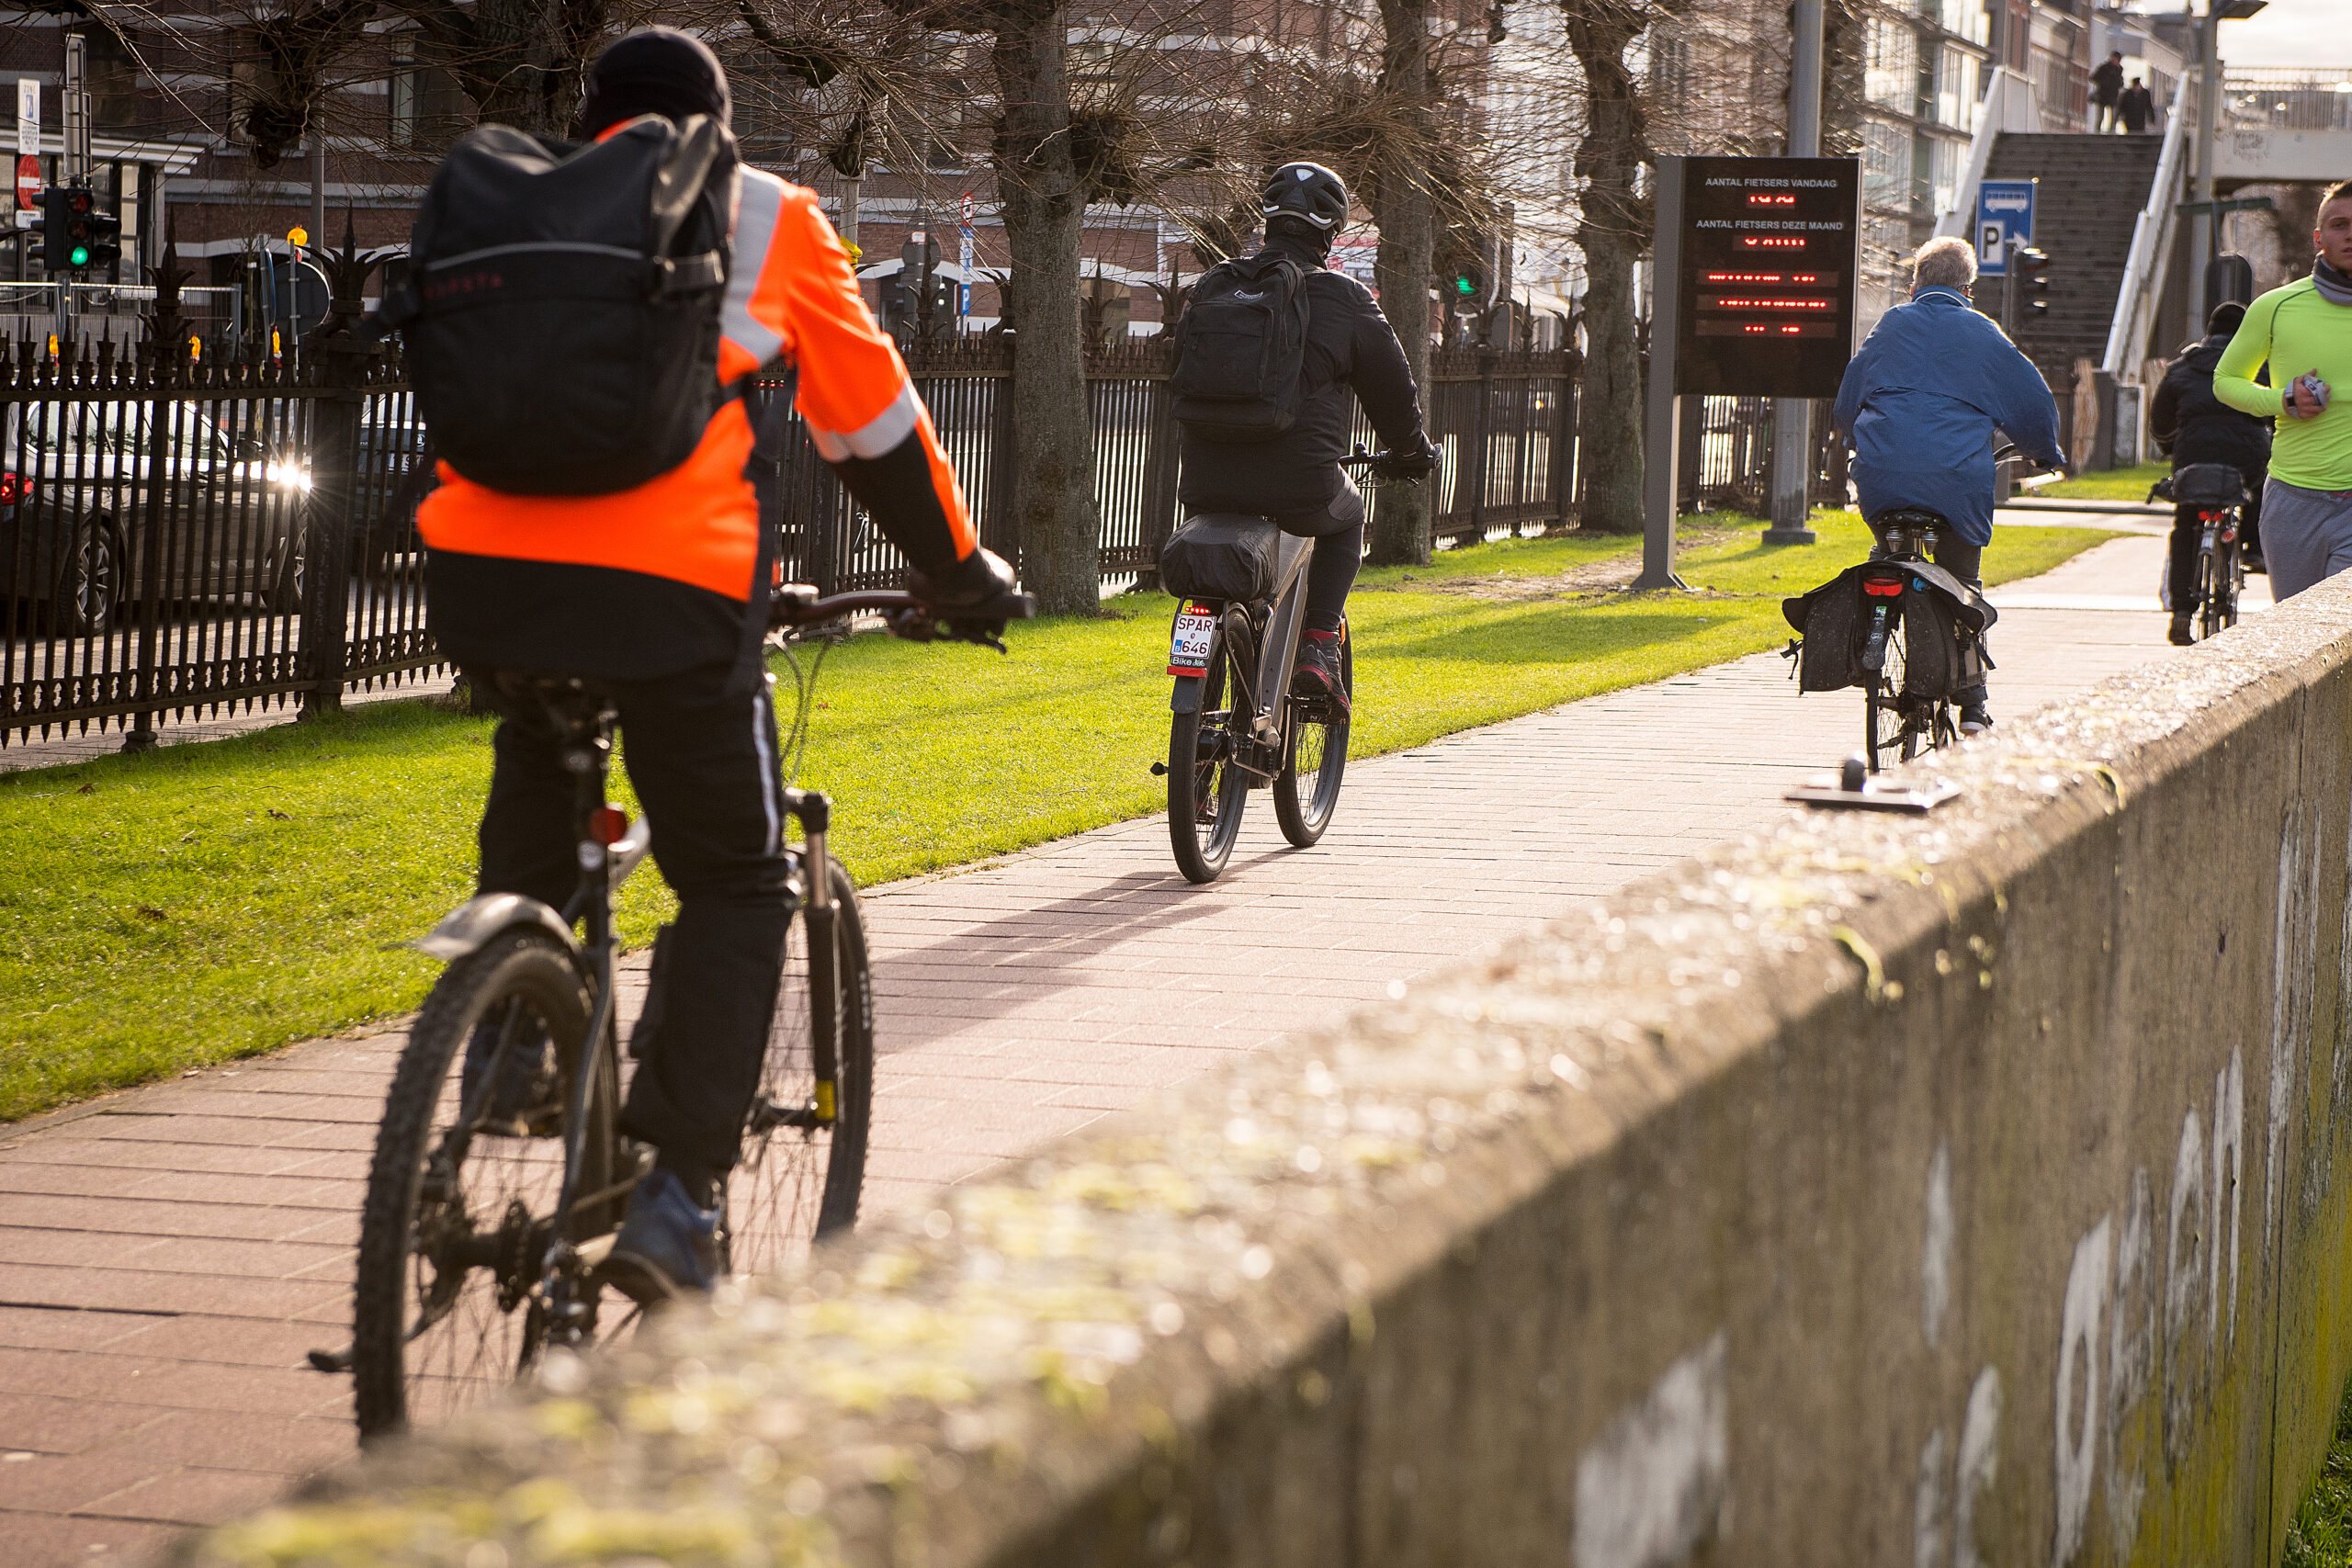 Of course Belgians ride bikes, but bike paths need to be more women-friendly and safer